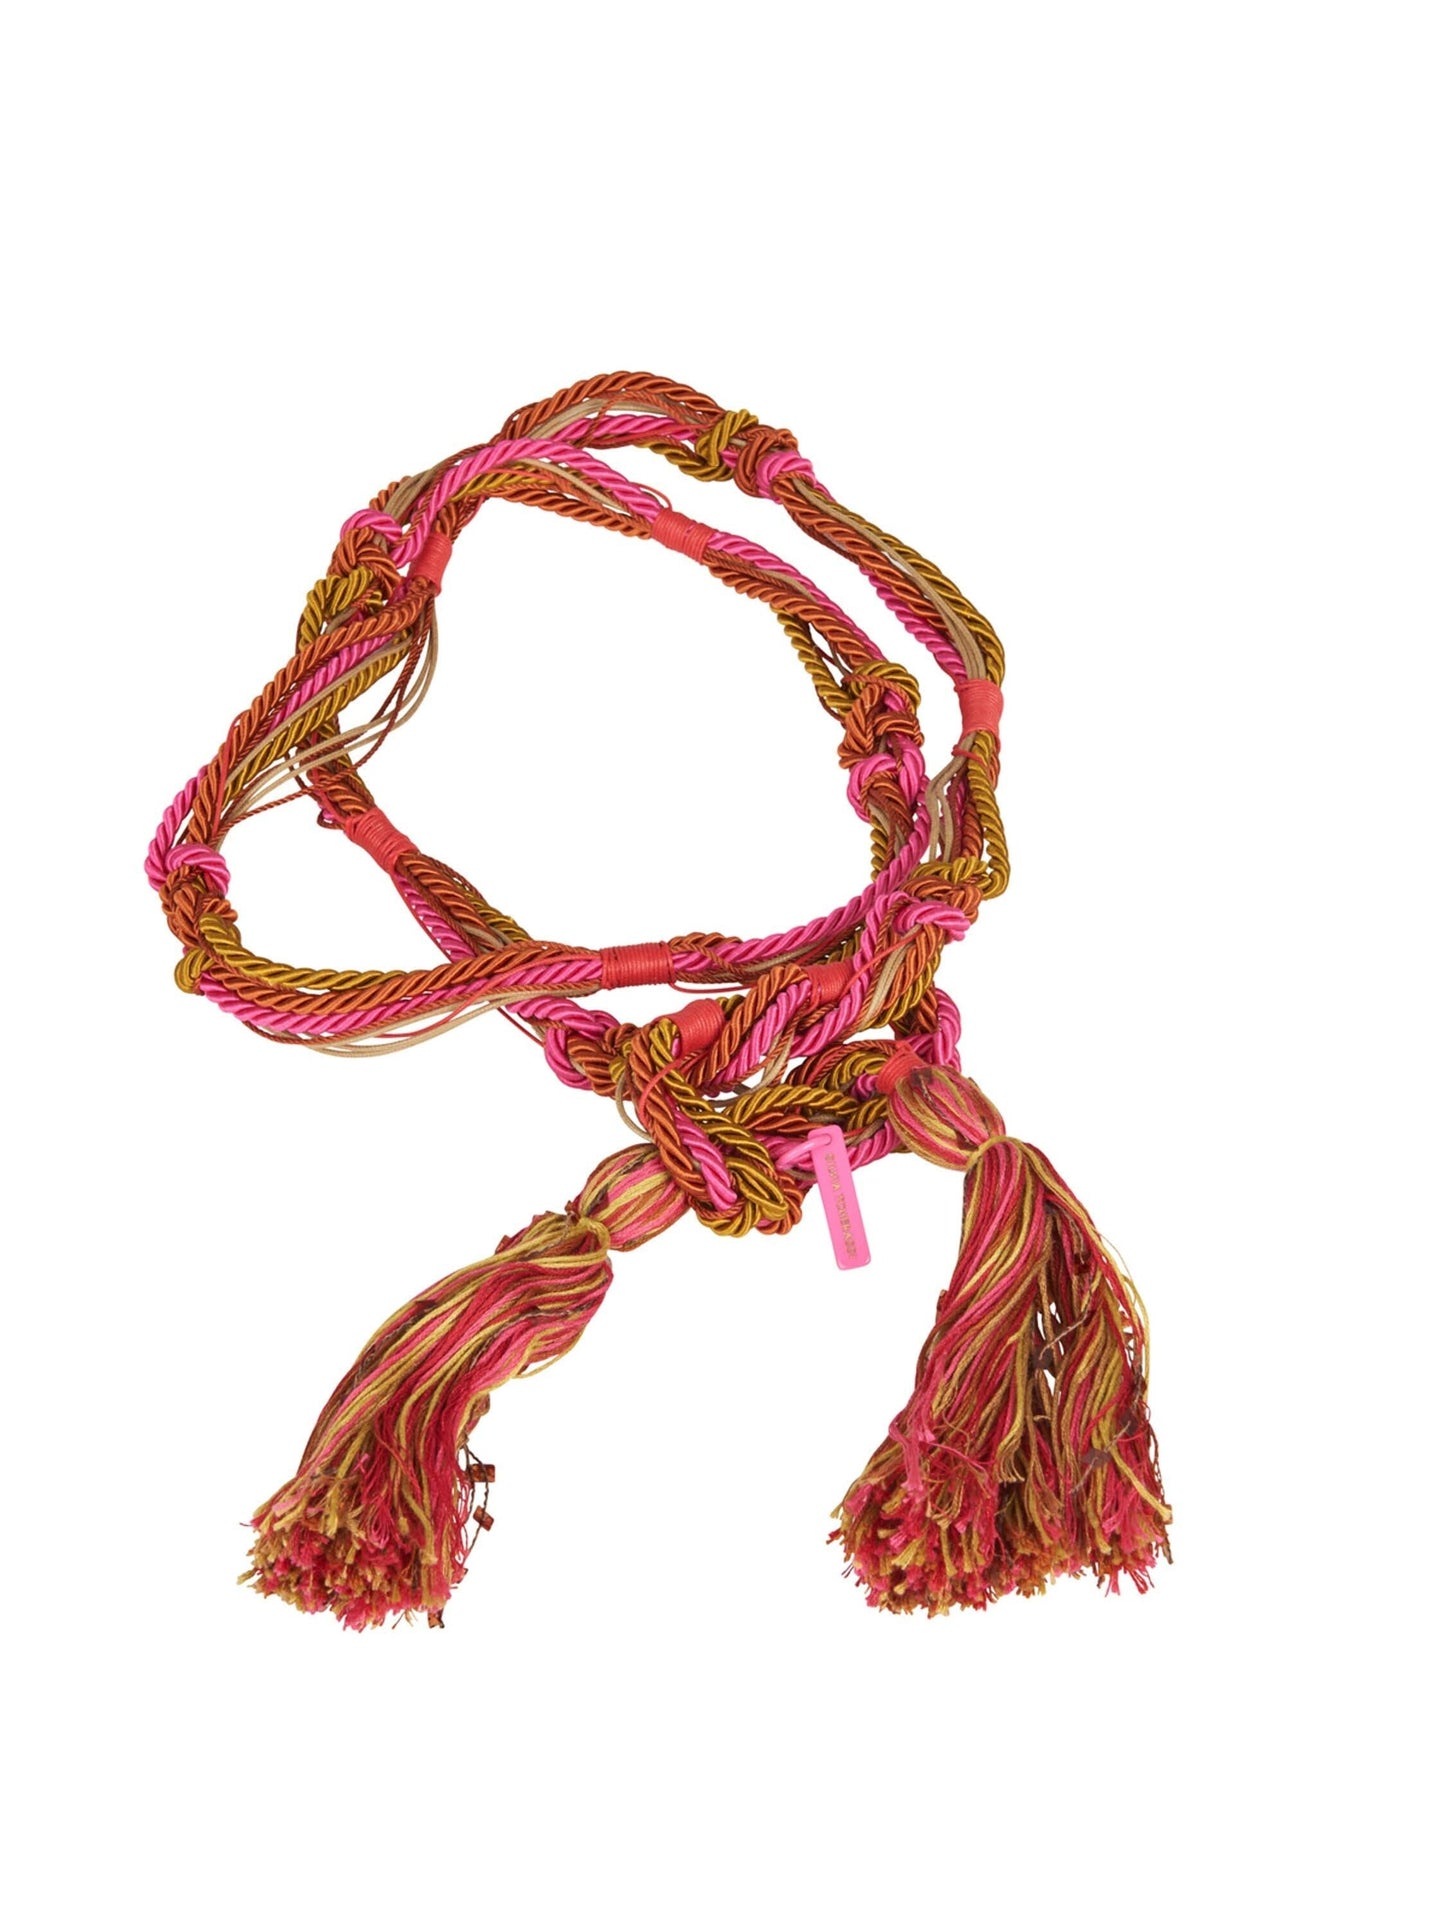 A pink and gold Nellie Belt Amber bracelet with a tassel.